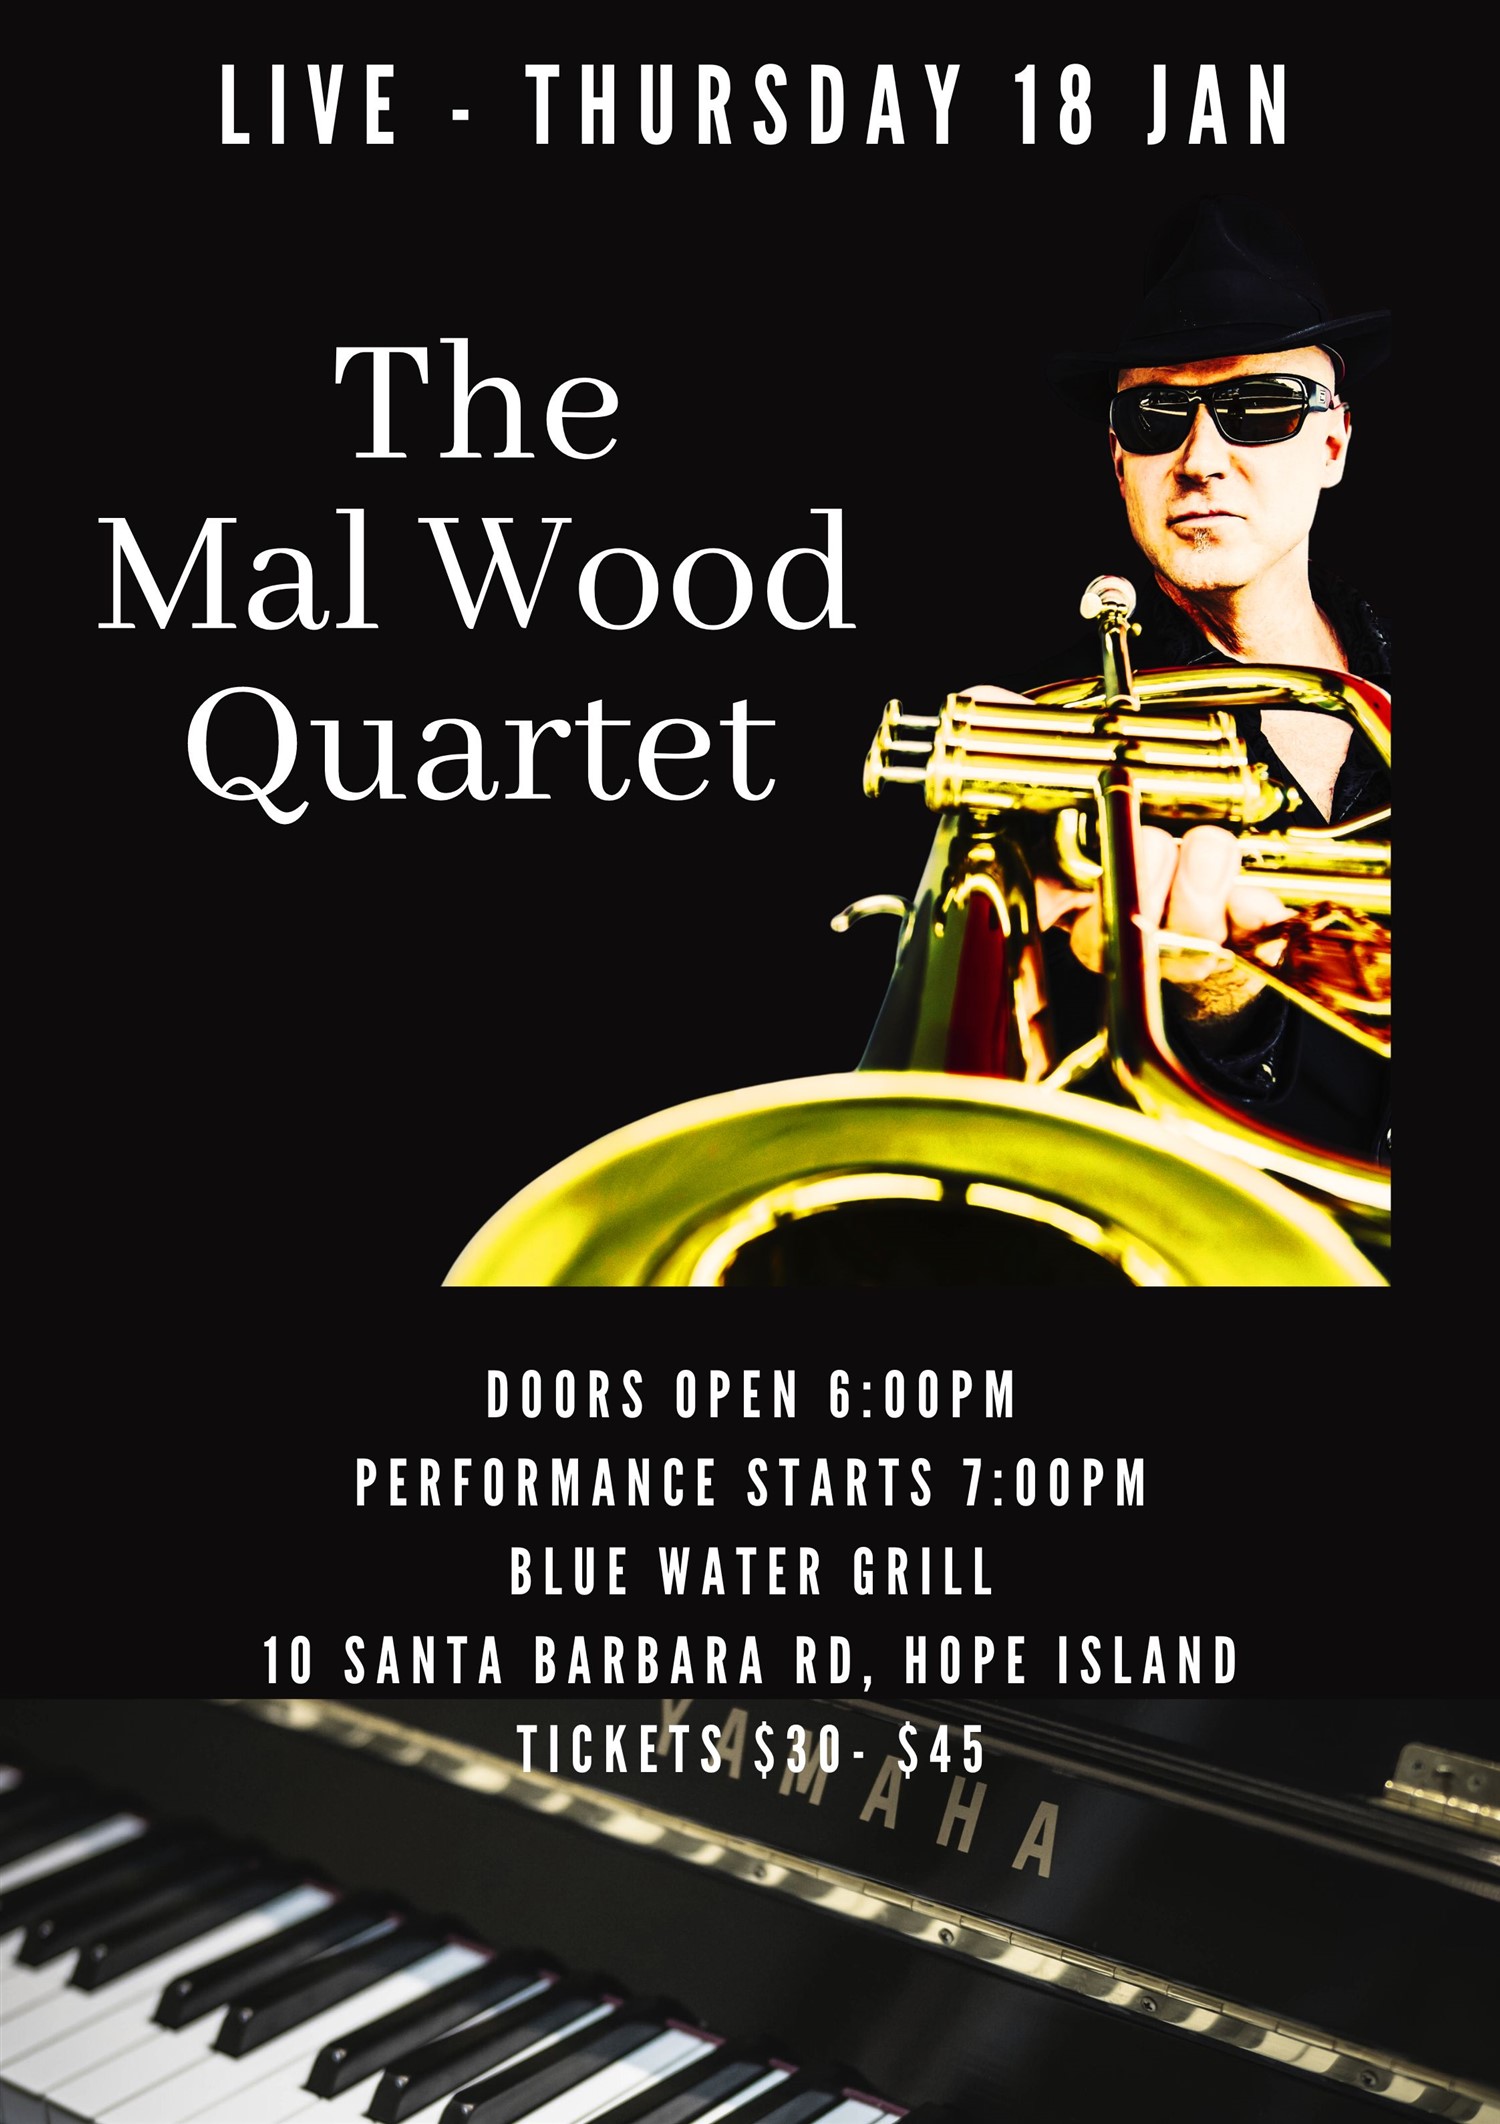 The Mal Wood Quartet  on Jan 18, 18:00@Hope Island Jazz - Blue Water Grill - Buy tickets and Get information on Hope Island Jazz hopeislandjazz.com.au